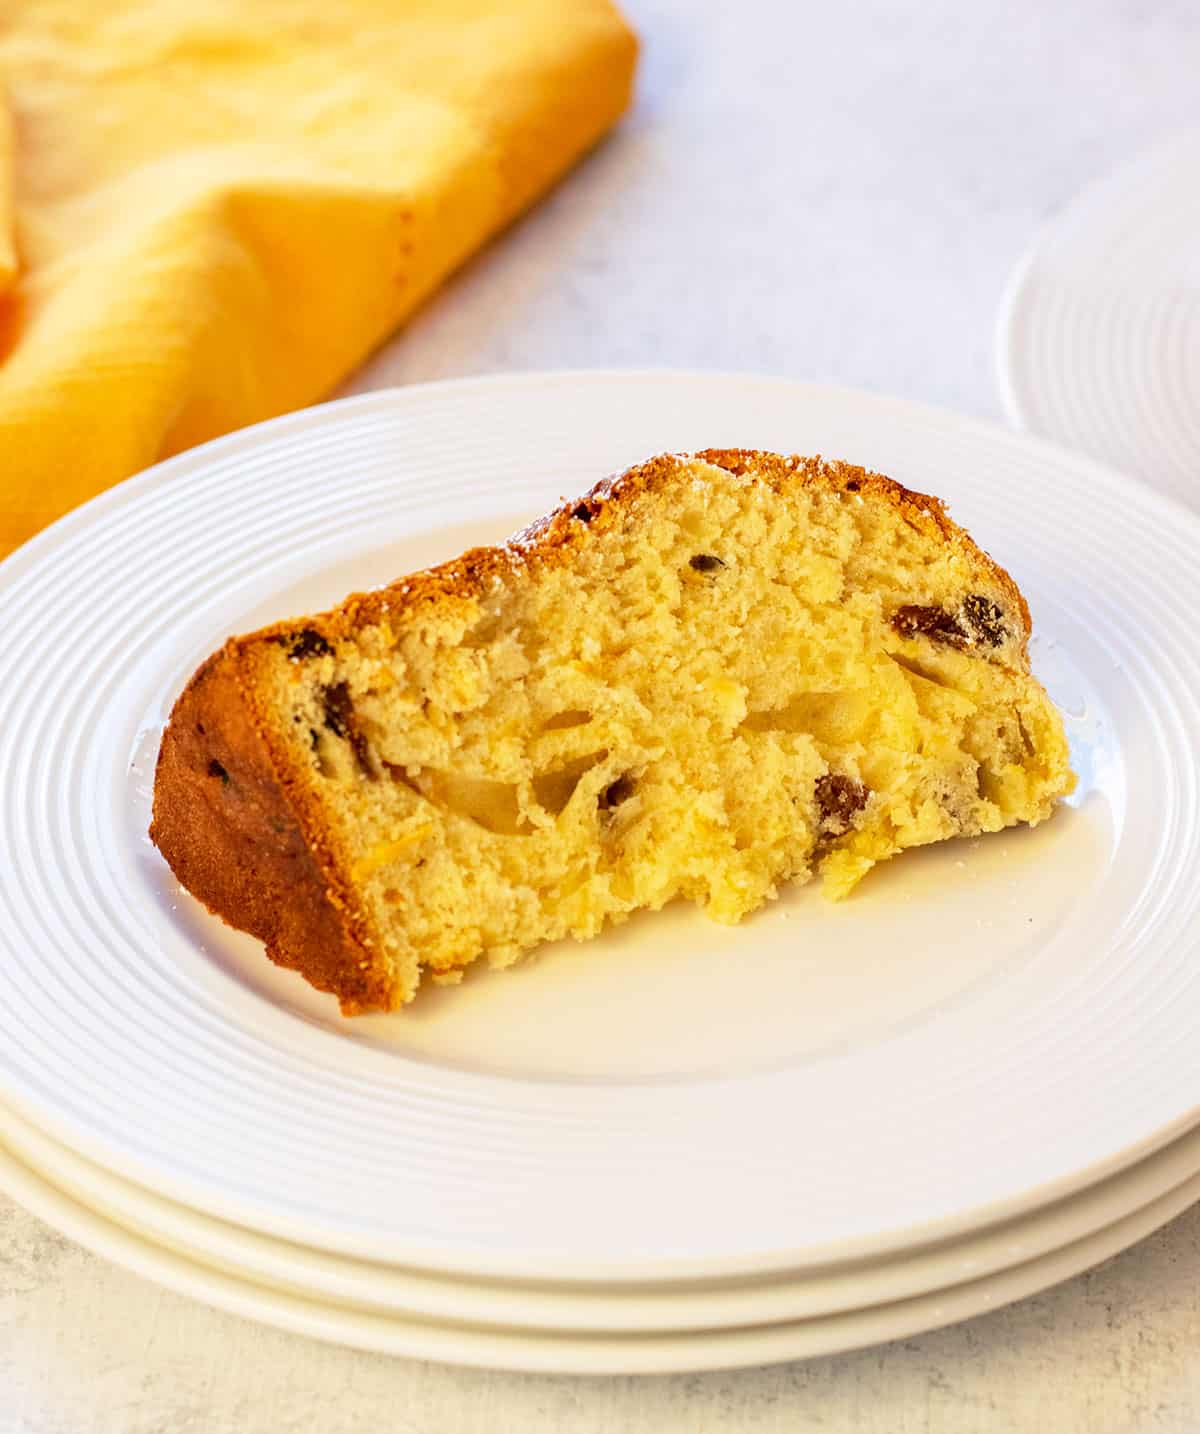 slice of panettone on a stack of plates